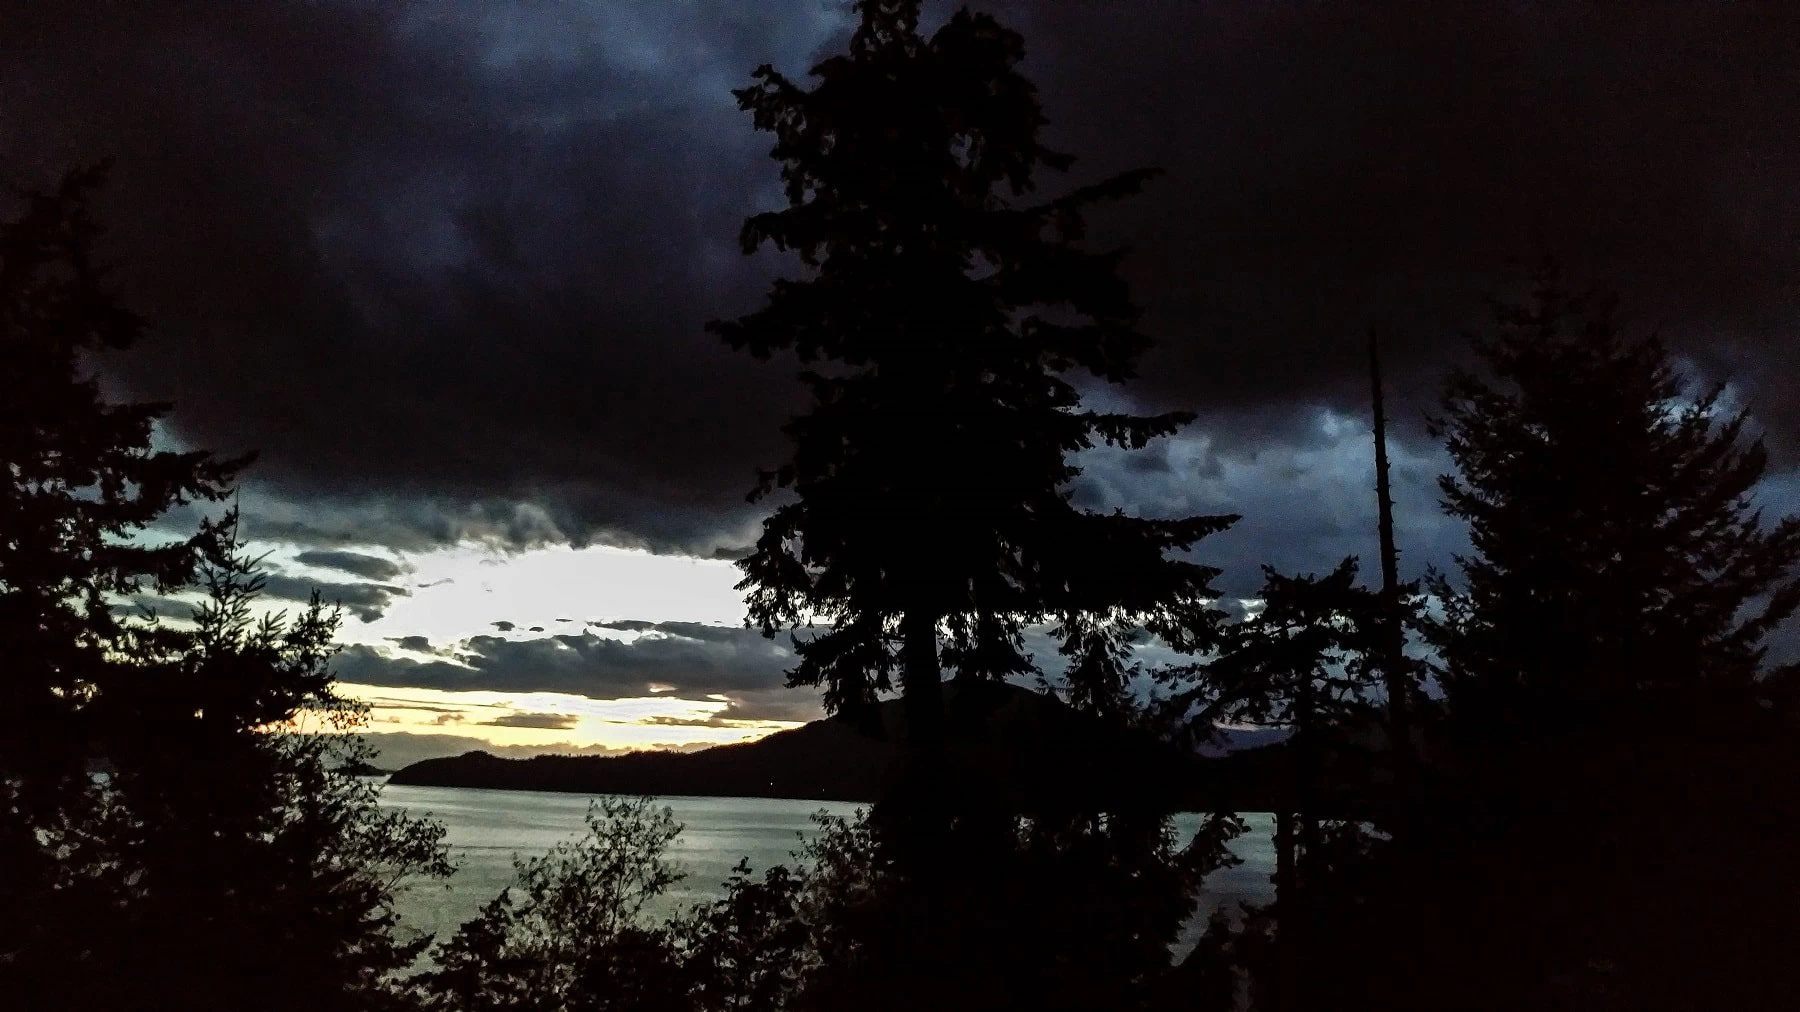 Walking through the woods as night is falling, with a view of howe sound